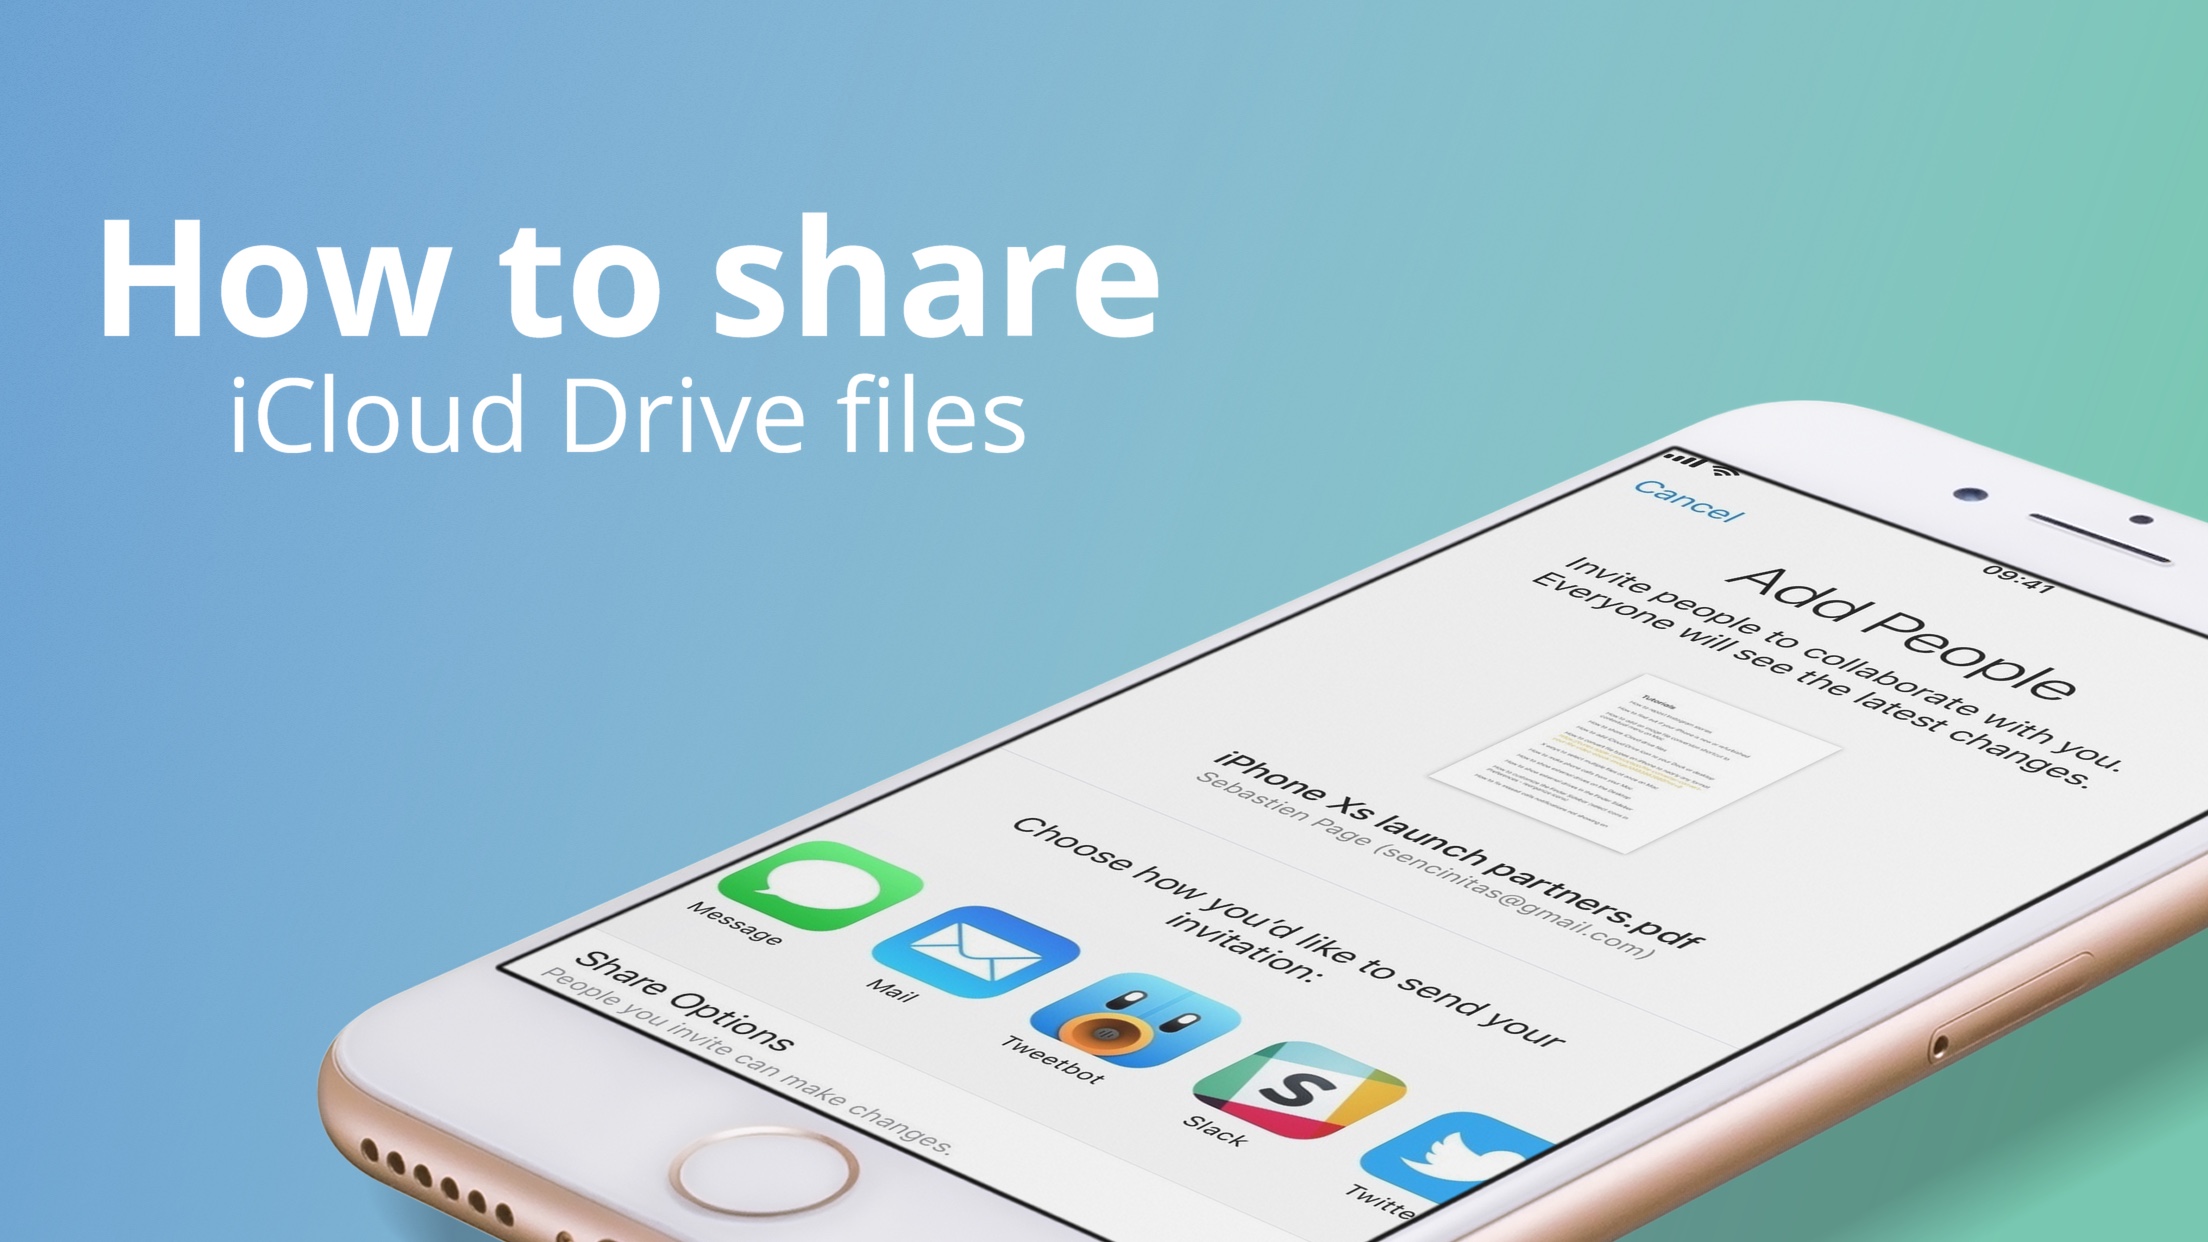 How to share icloud drive files